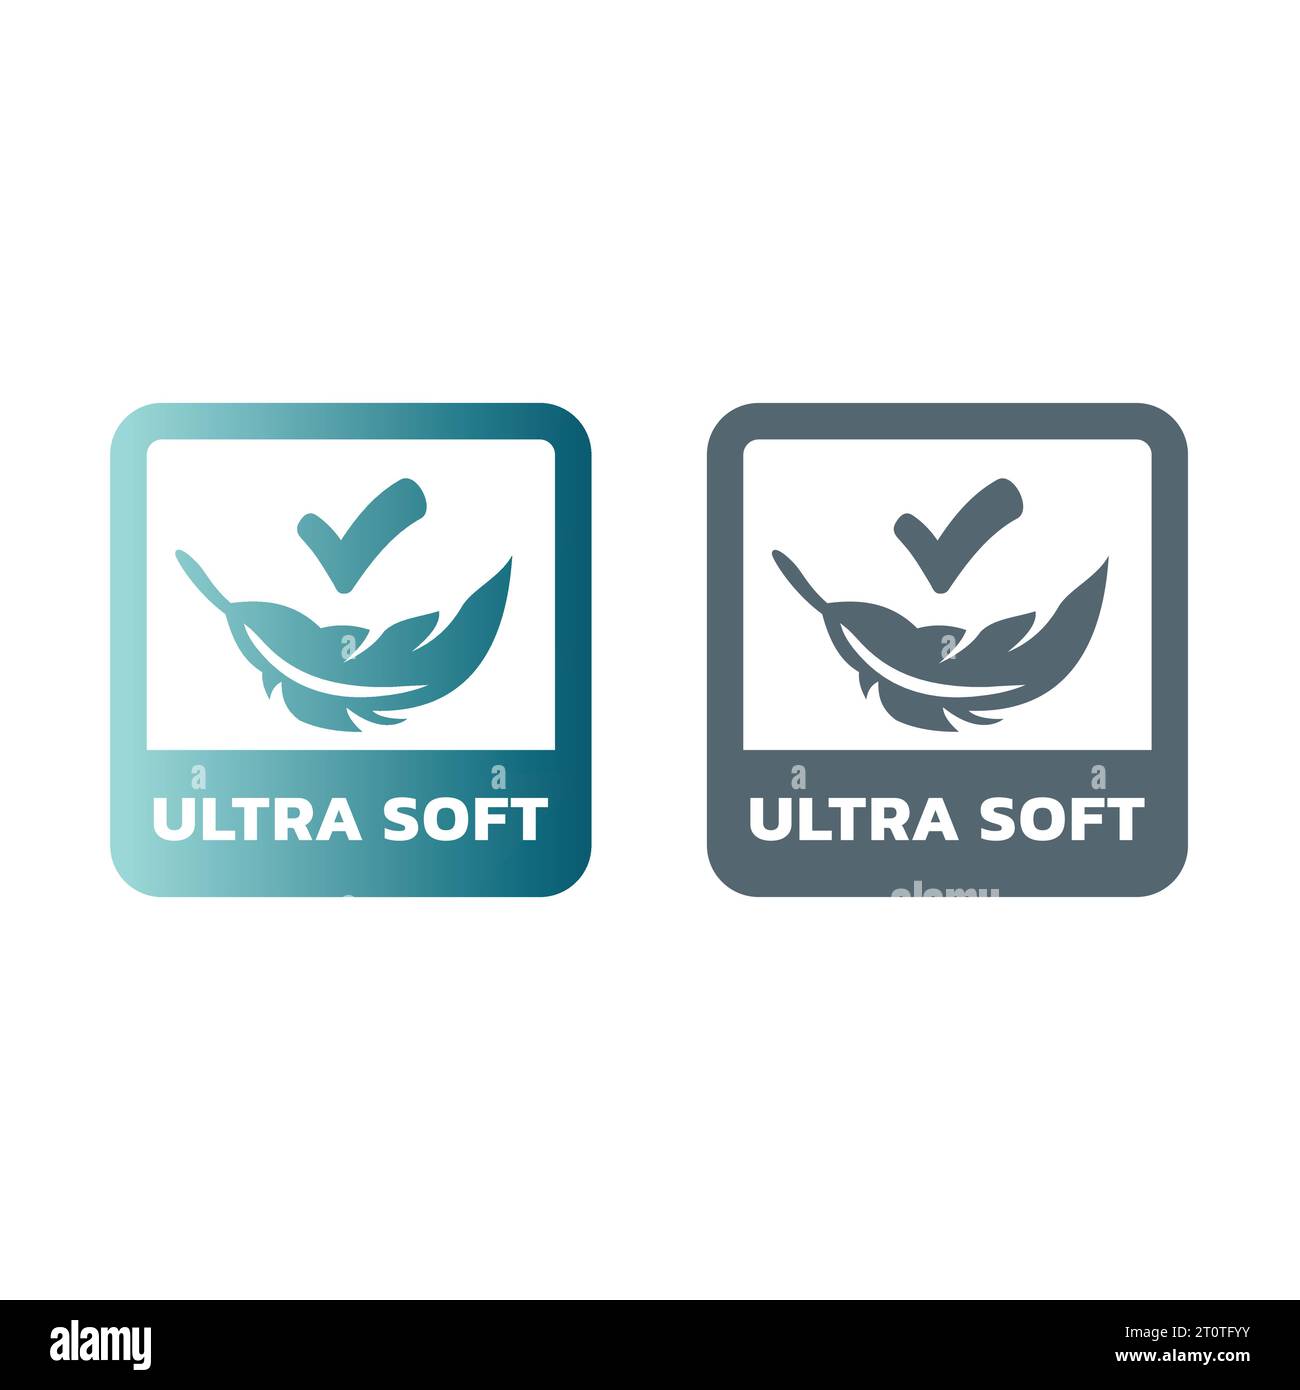 Ultra soft vector label. Ultrasoft sticker with feather for cloth, fabric or napkin. Stock Vector